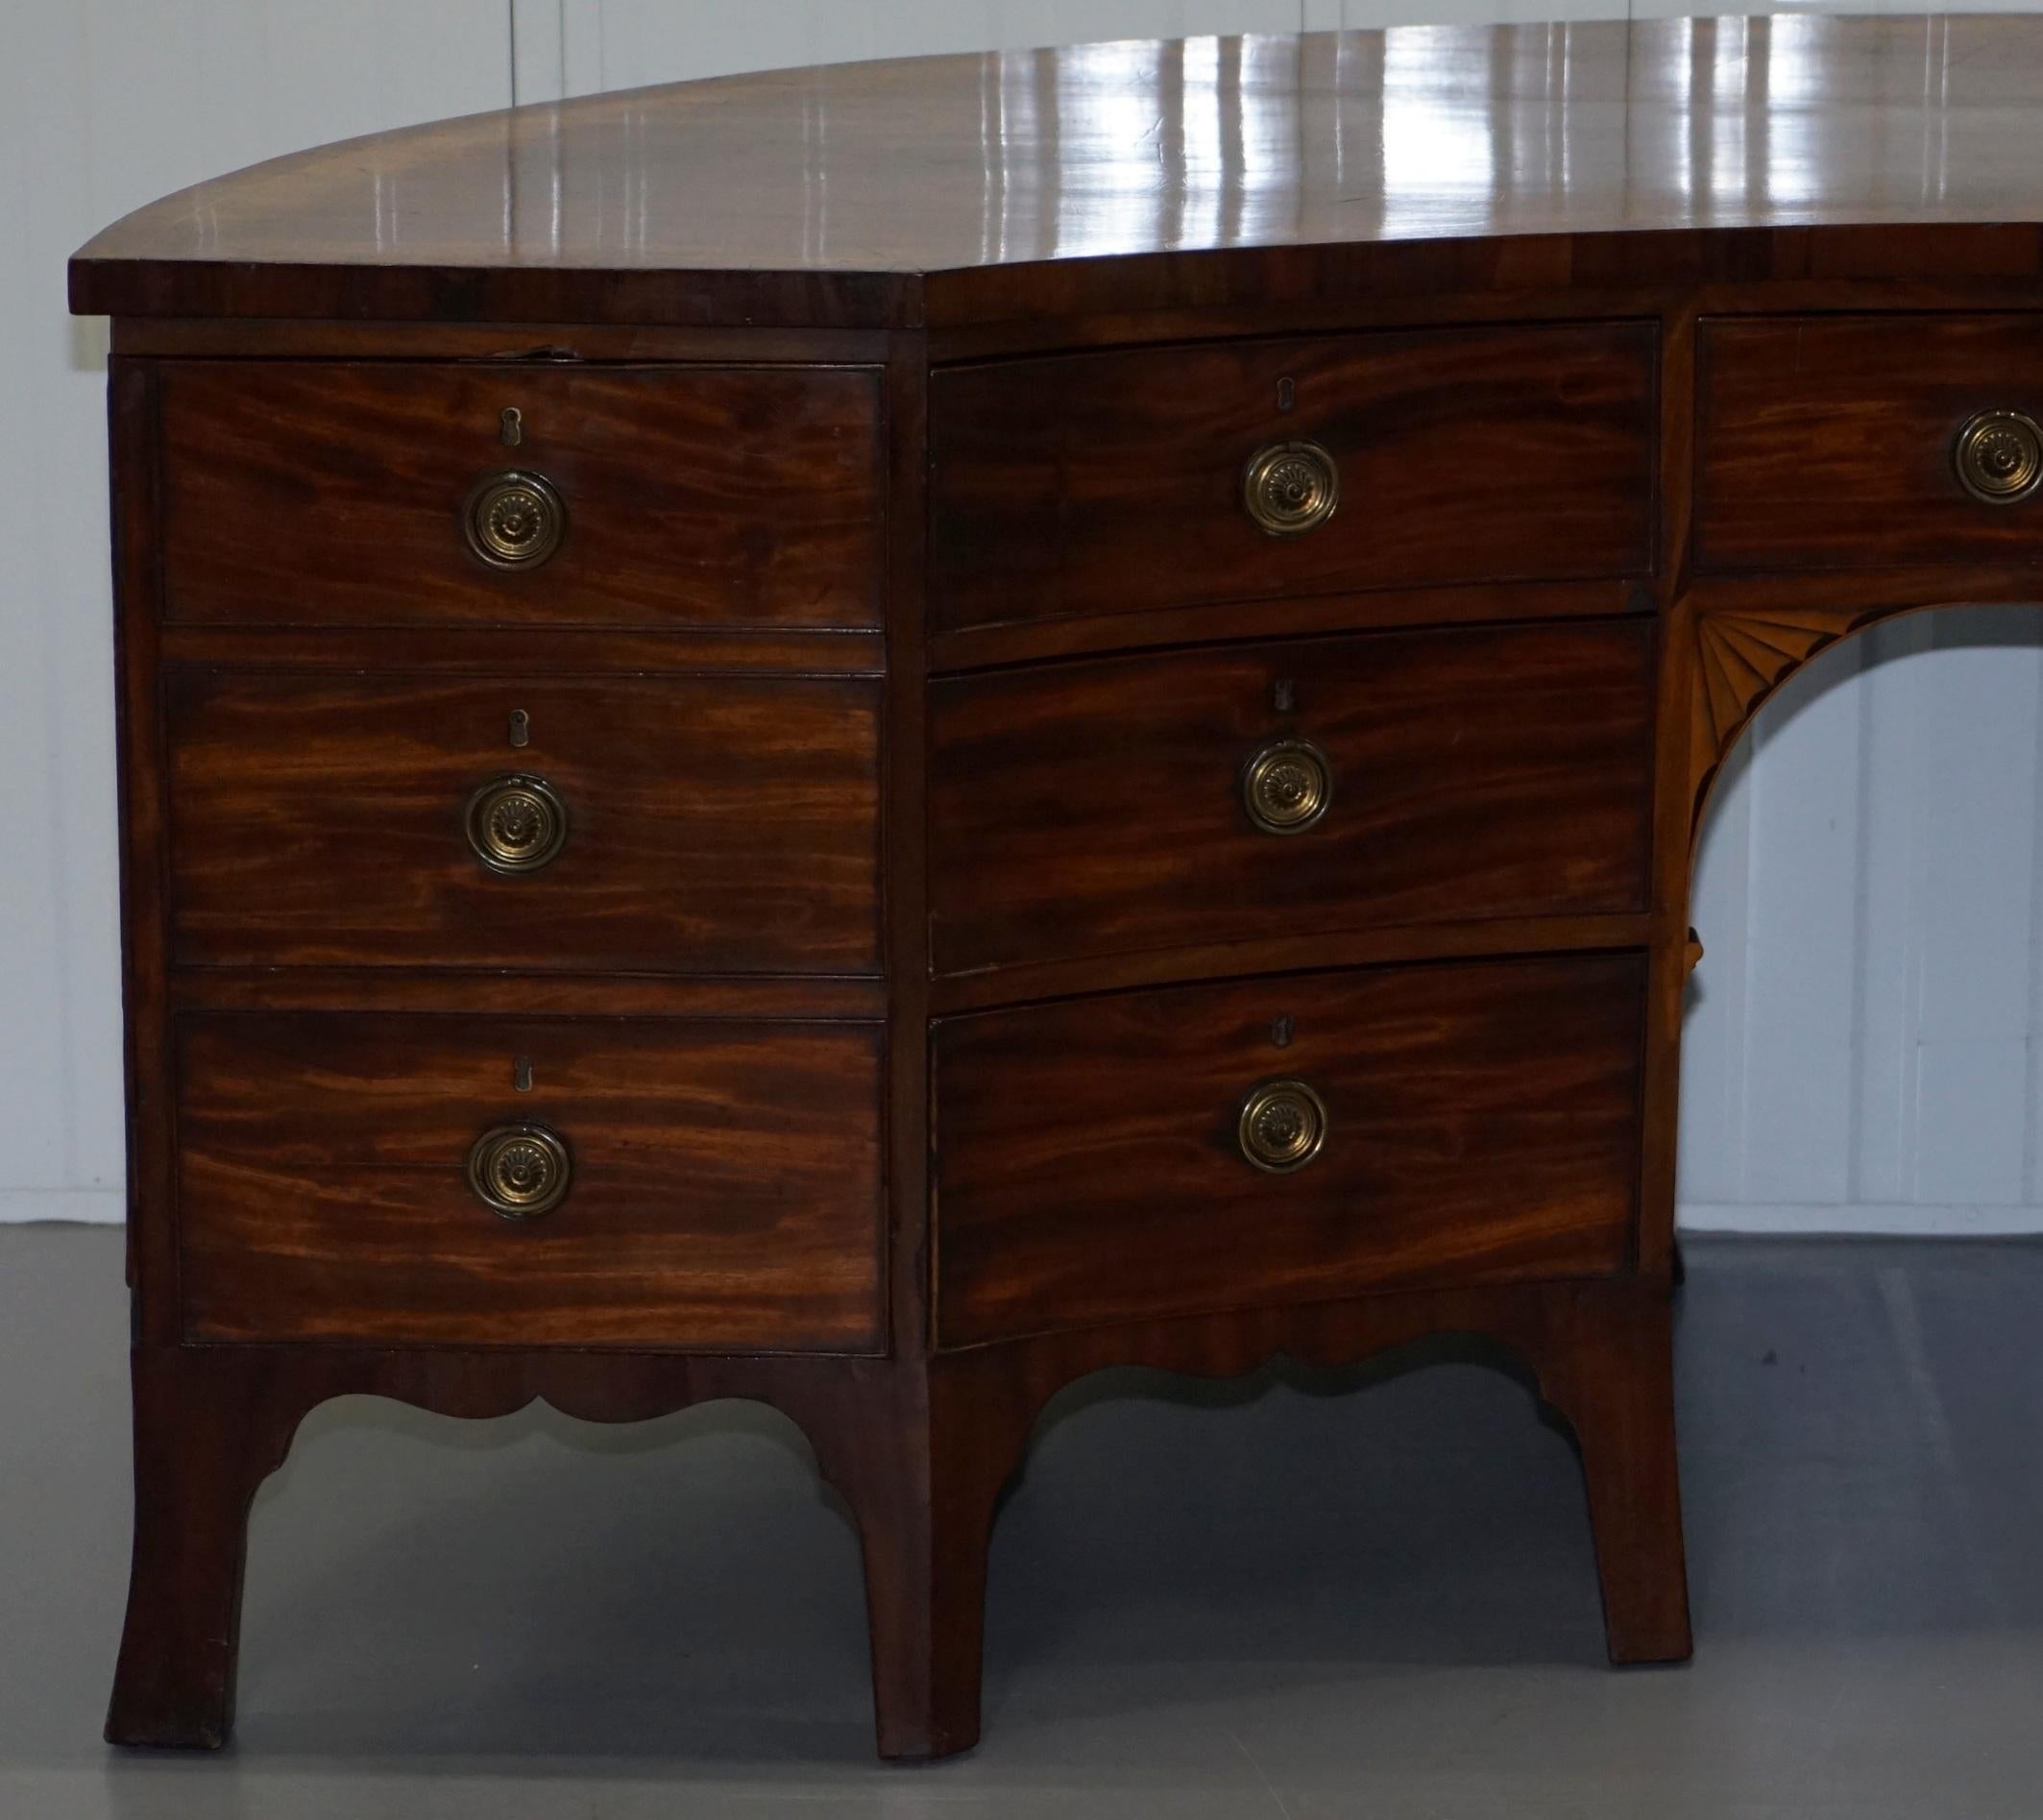 We are delighted to offer for auction this exceptionally rare and very fine circa 1760 Thomas Chippendale era George III mahogany crescent sideboard from The former Duke of Wellingtons home Athelhampton House in the Billiards room

This is a rare